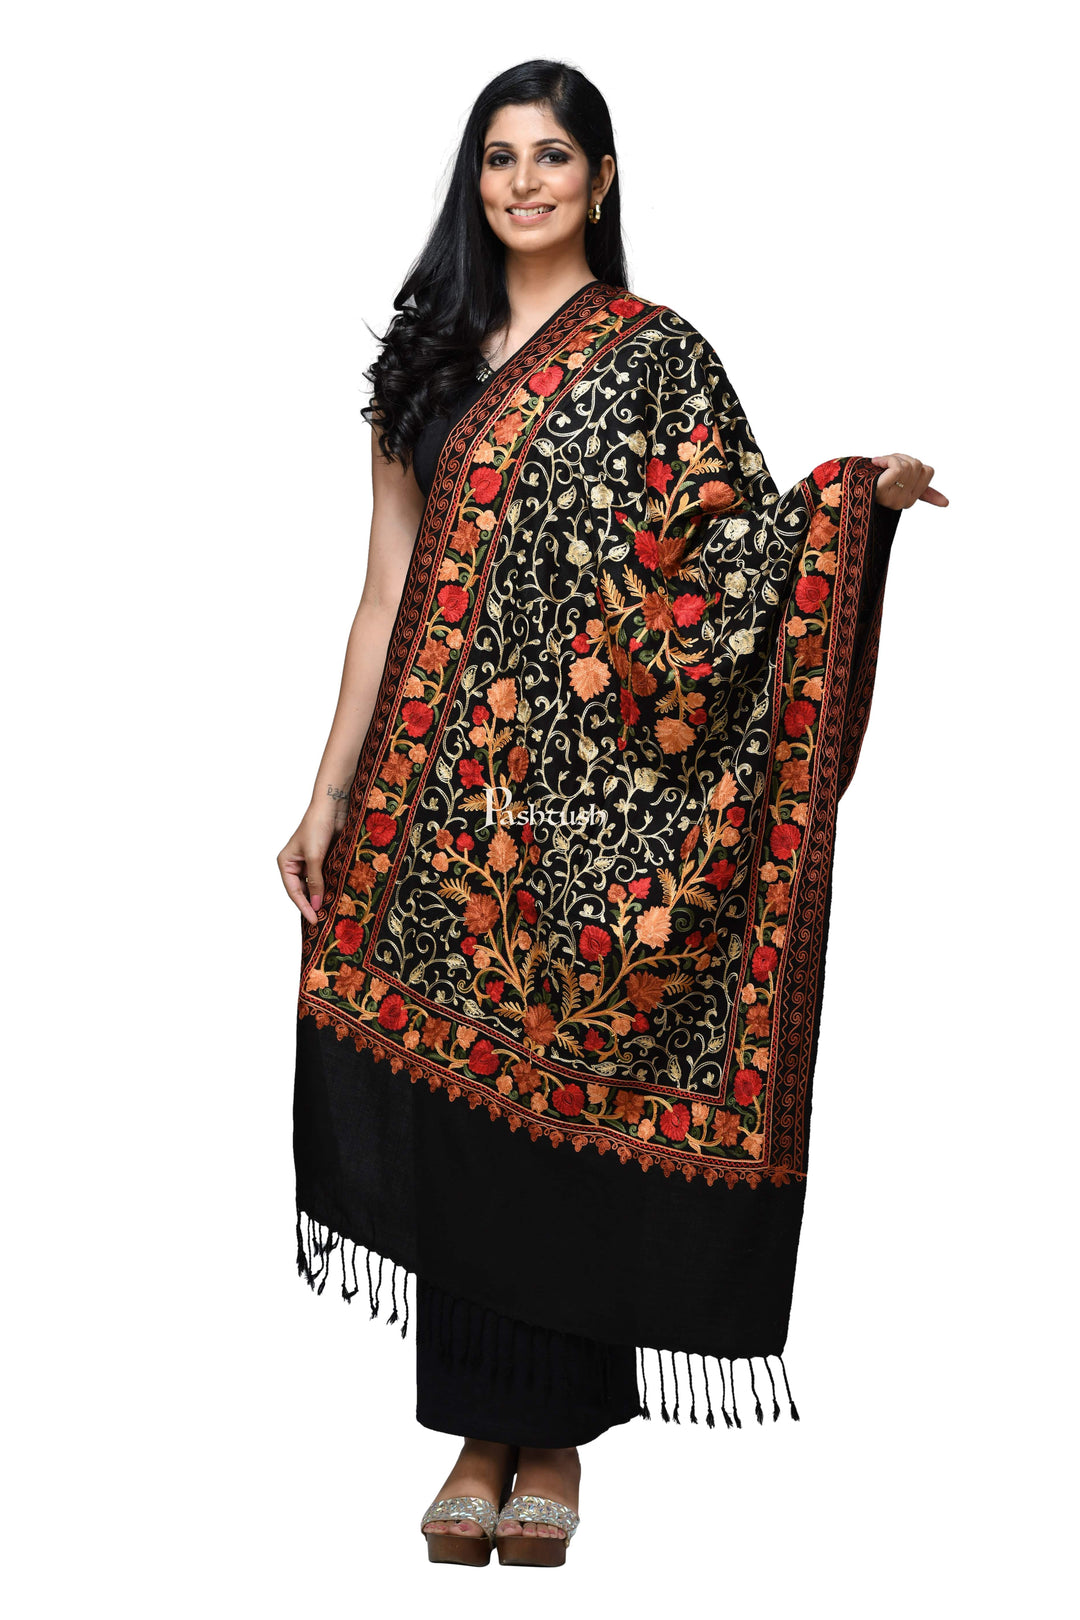 Pashwool Womens Stoles and Scarves Scarf Pashwool Womens Kashmiri Embroidery Stole, Soft And Warm, Woollen Stole, Black